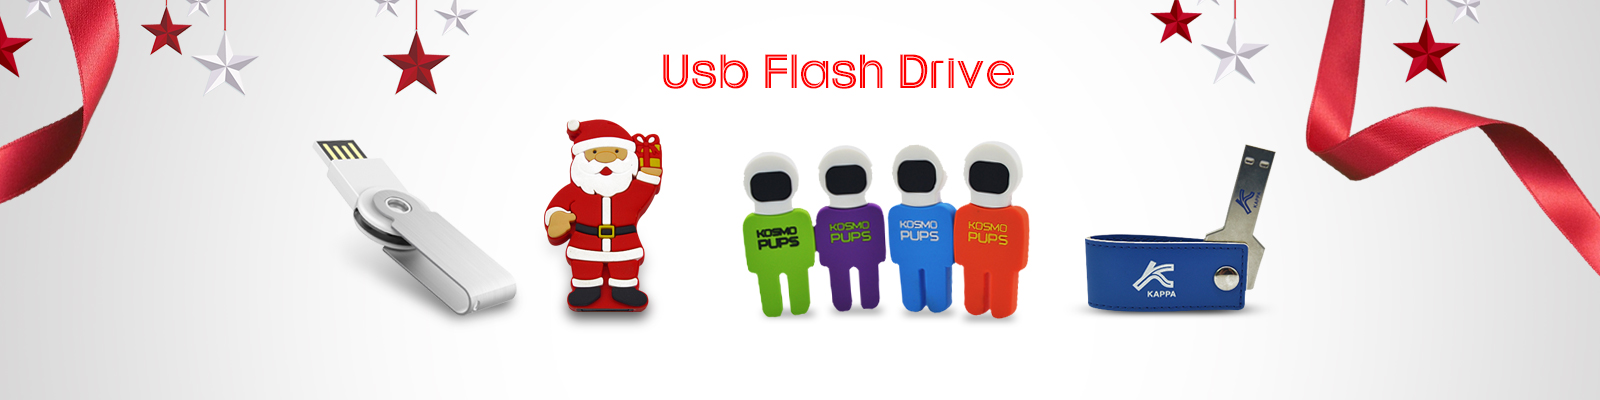 Cool flash drives | New usb flash drive | leadway group limited